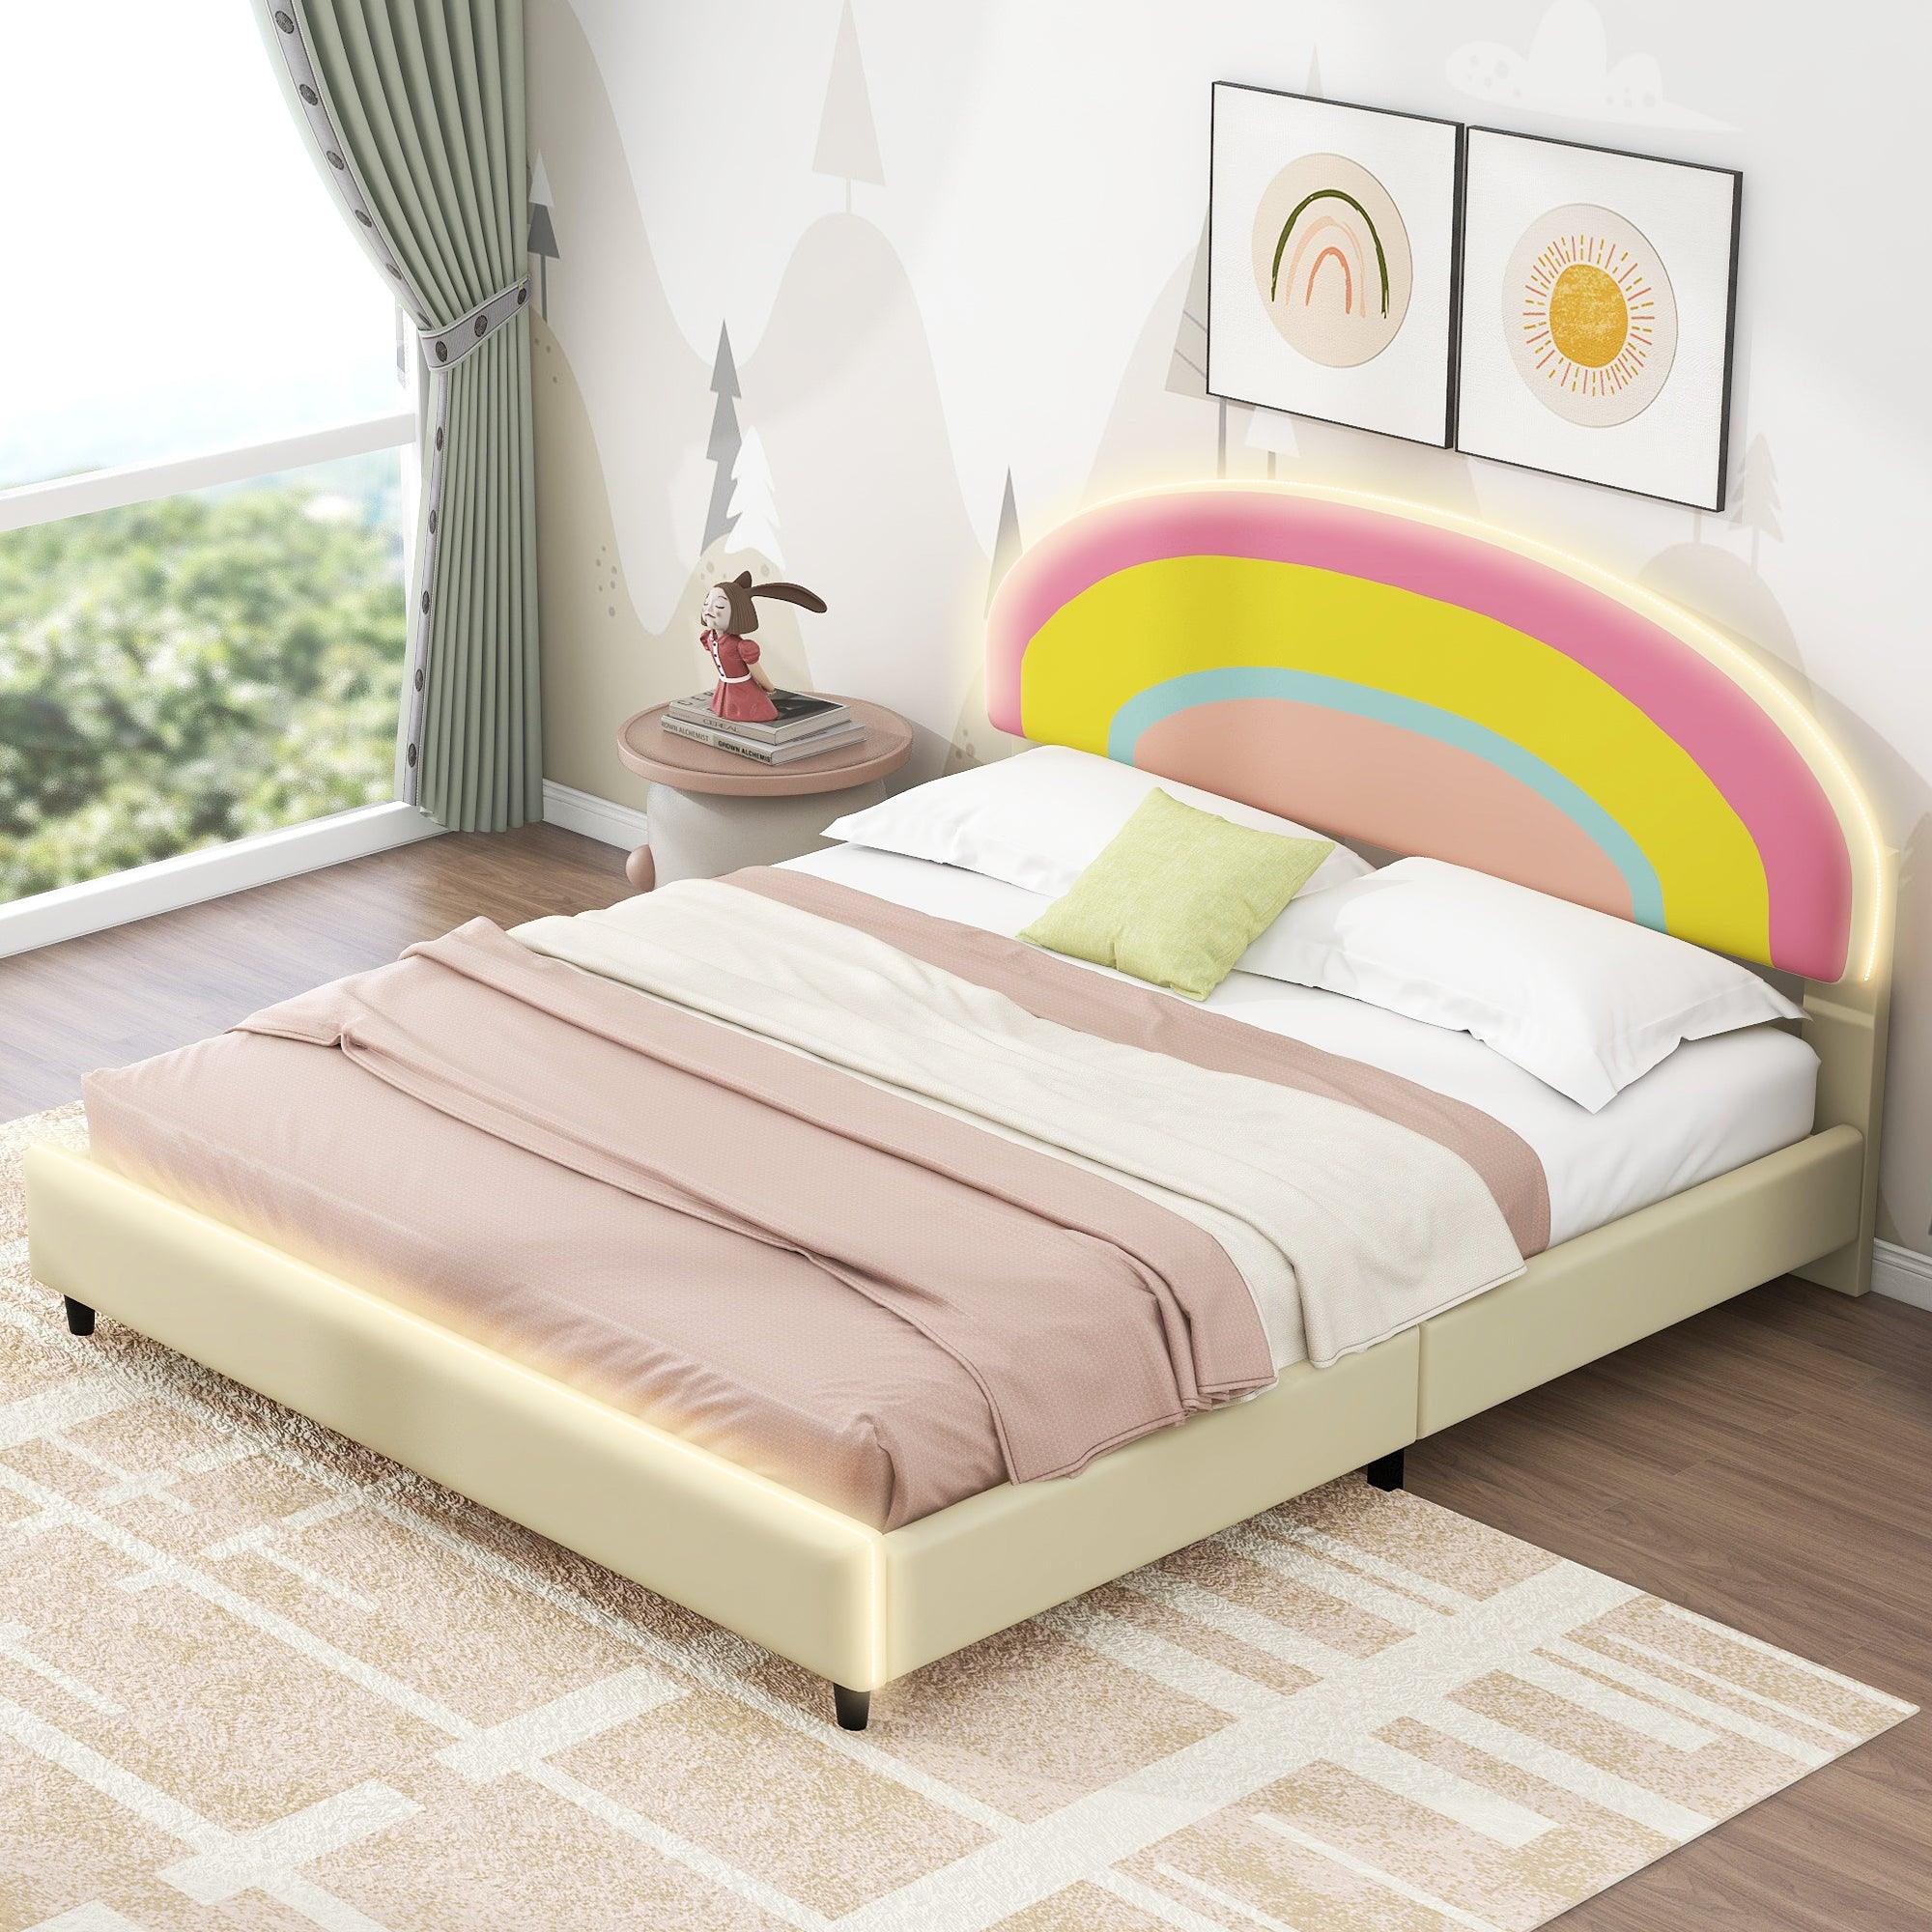 🆓🚛 Full Size Upholstered Platform Bed With Rainbow Shaped and Height-Adjustbale Headboard, Led Light Strips, Beige